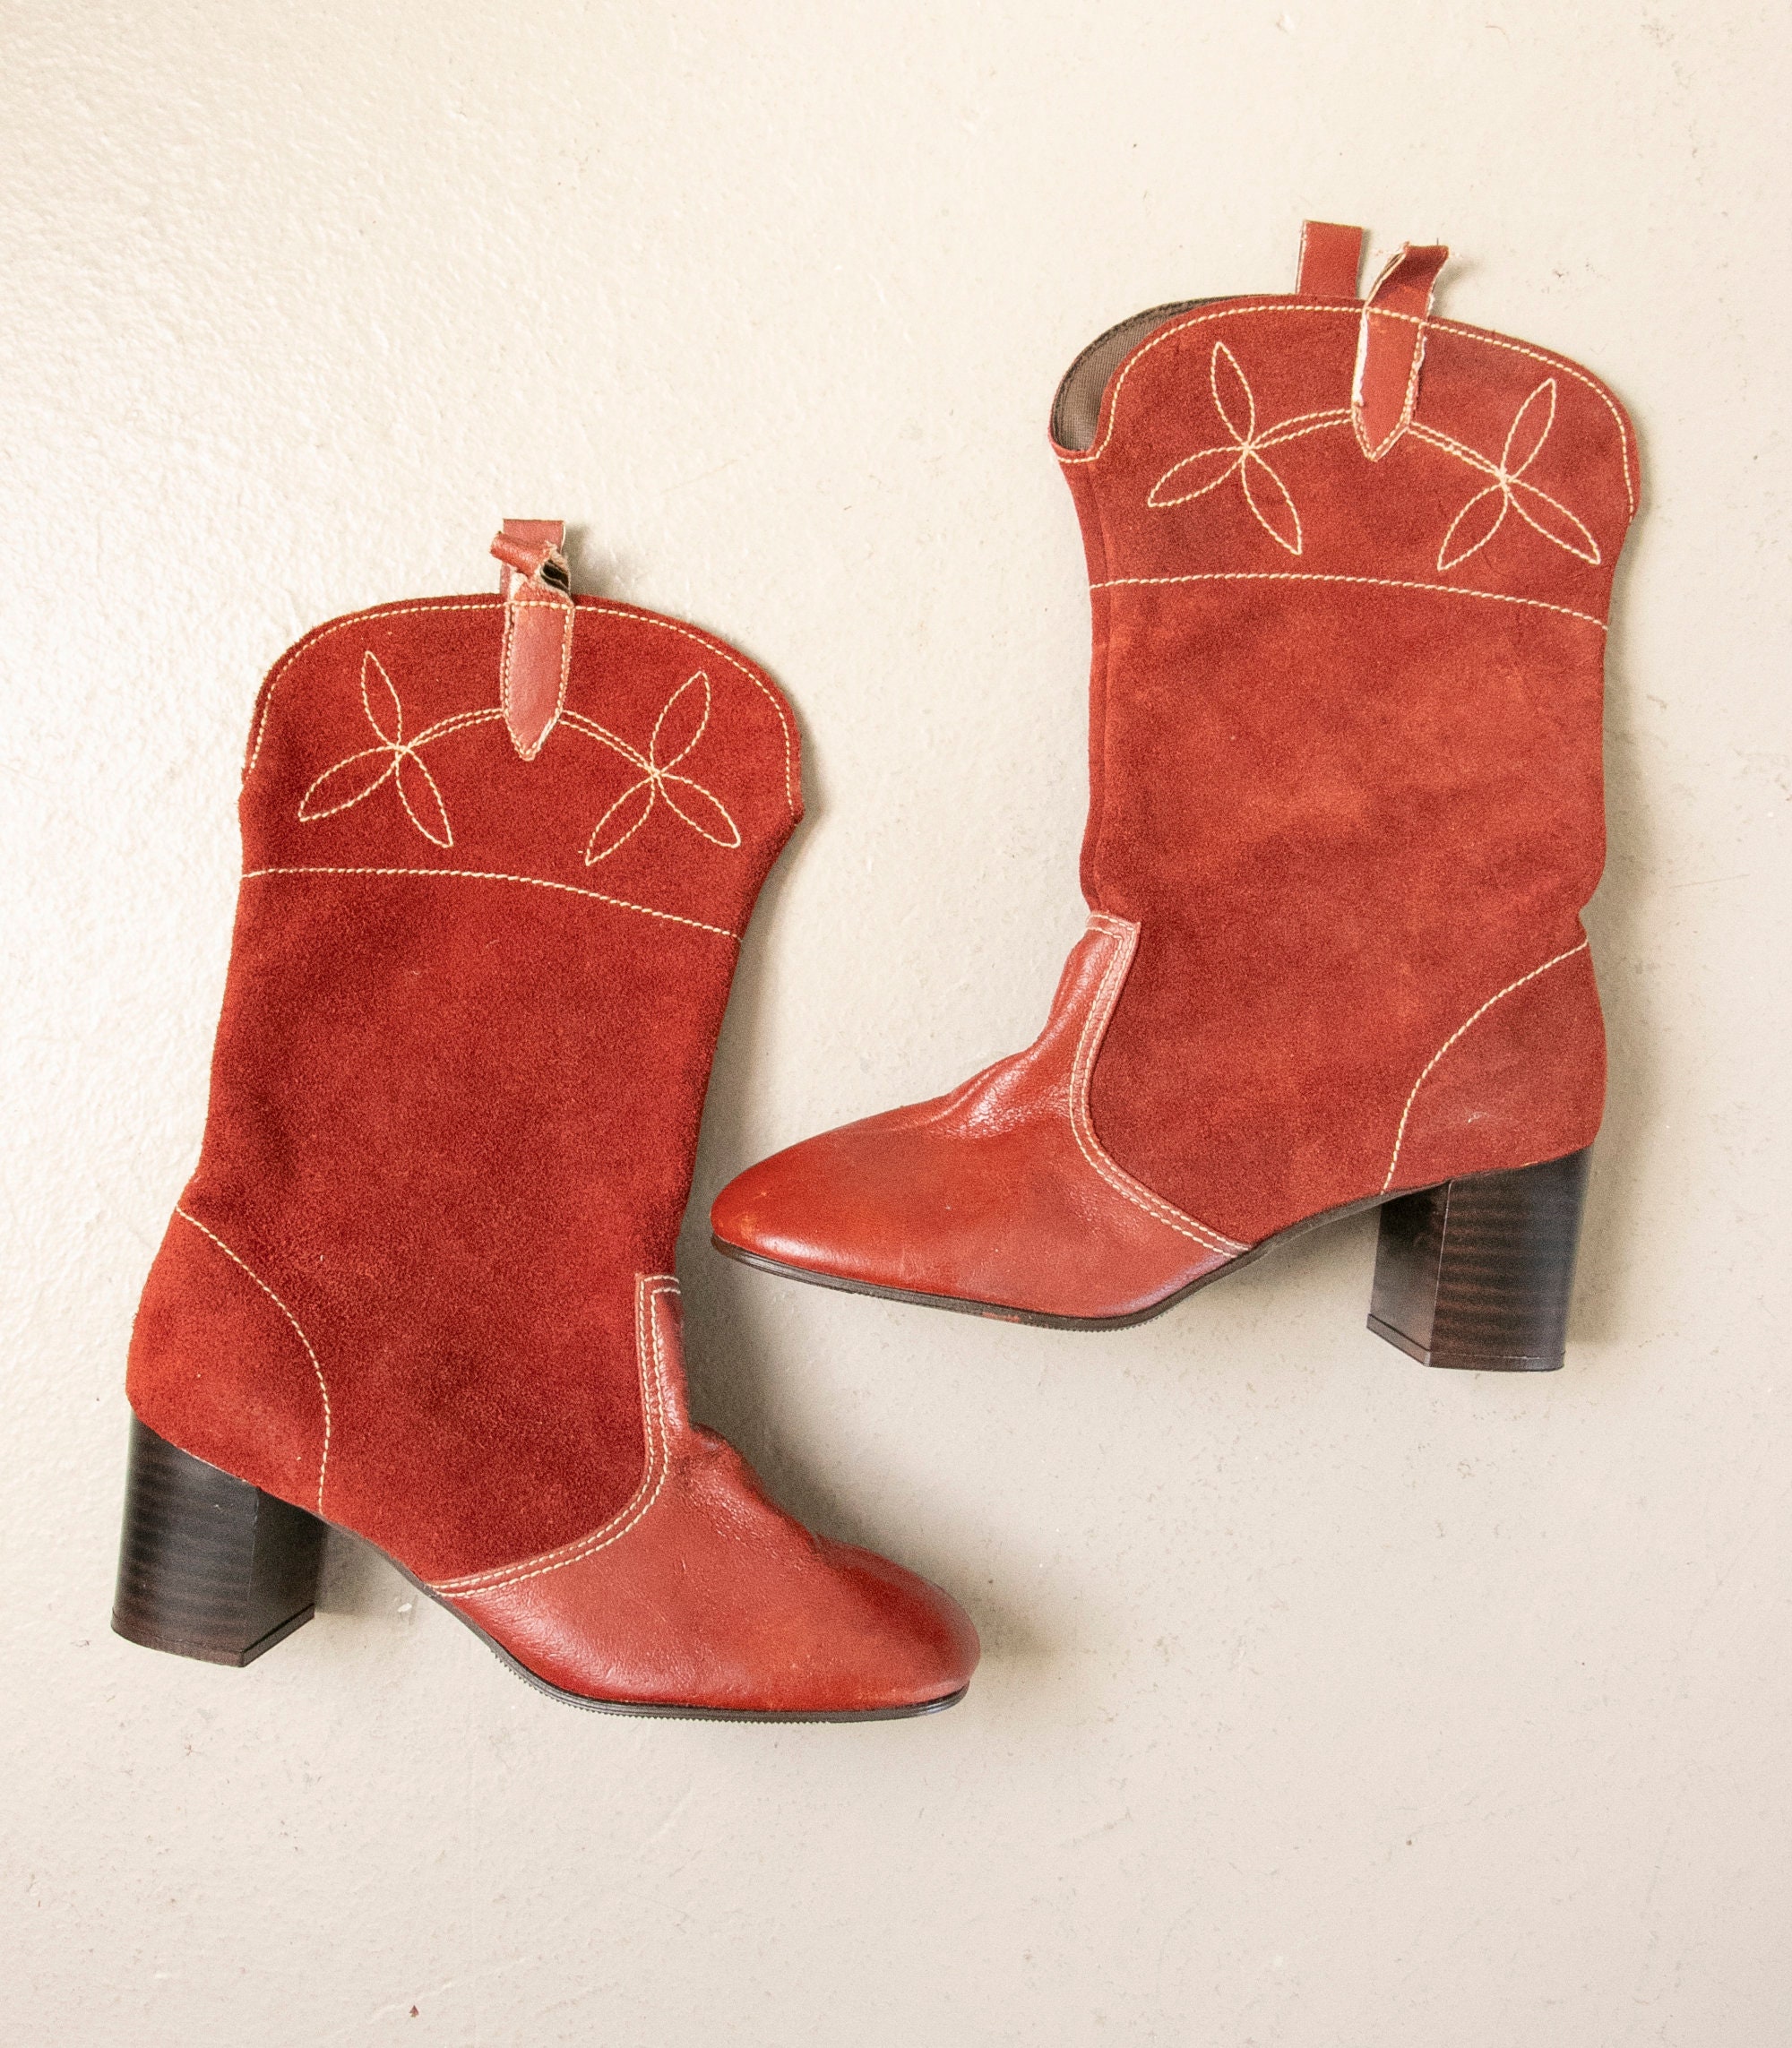 Vintage 60s 70s Red Suede Lace Up Knee High Boots by Battani, size 7-7.5